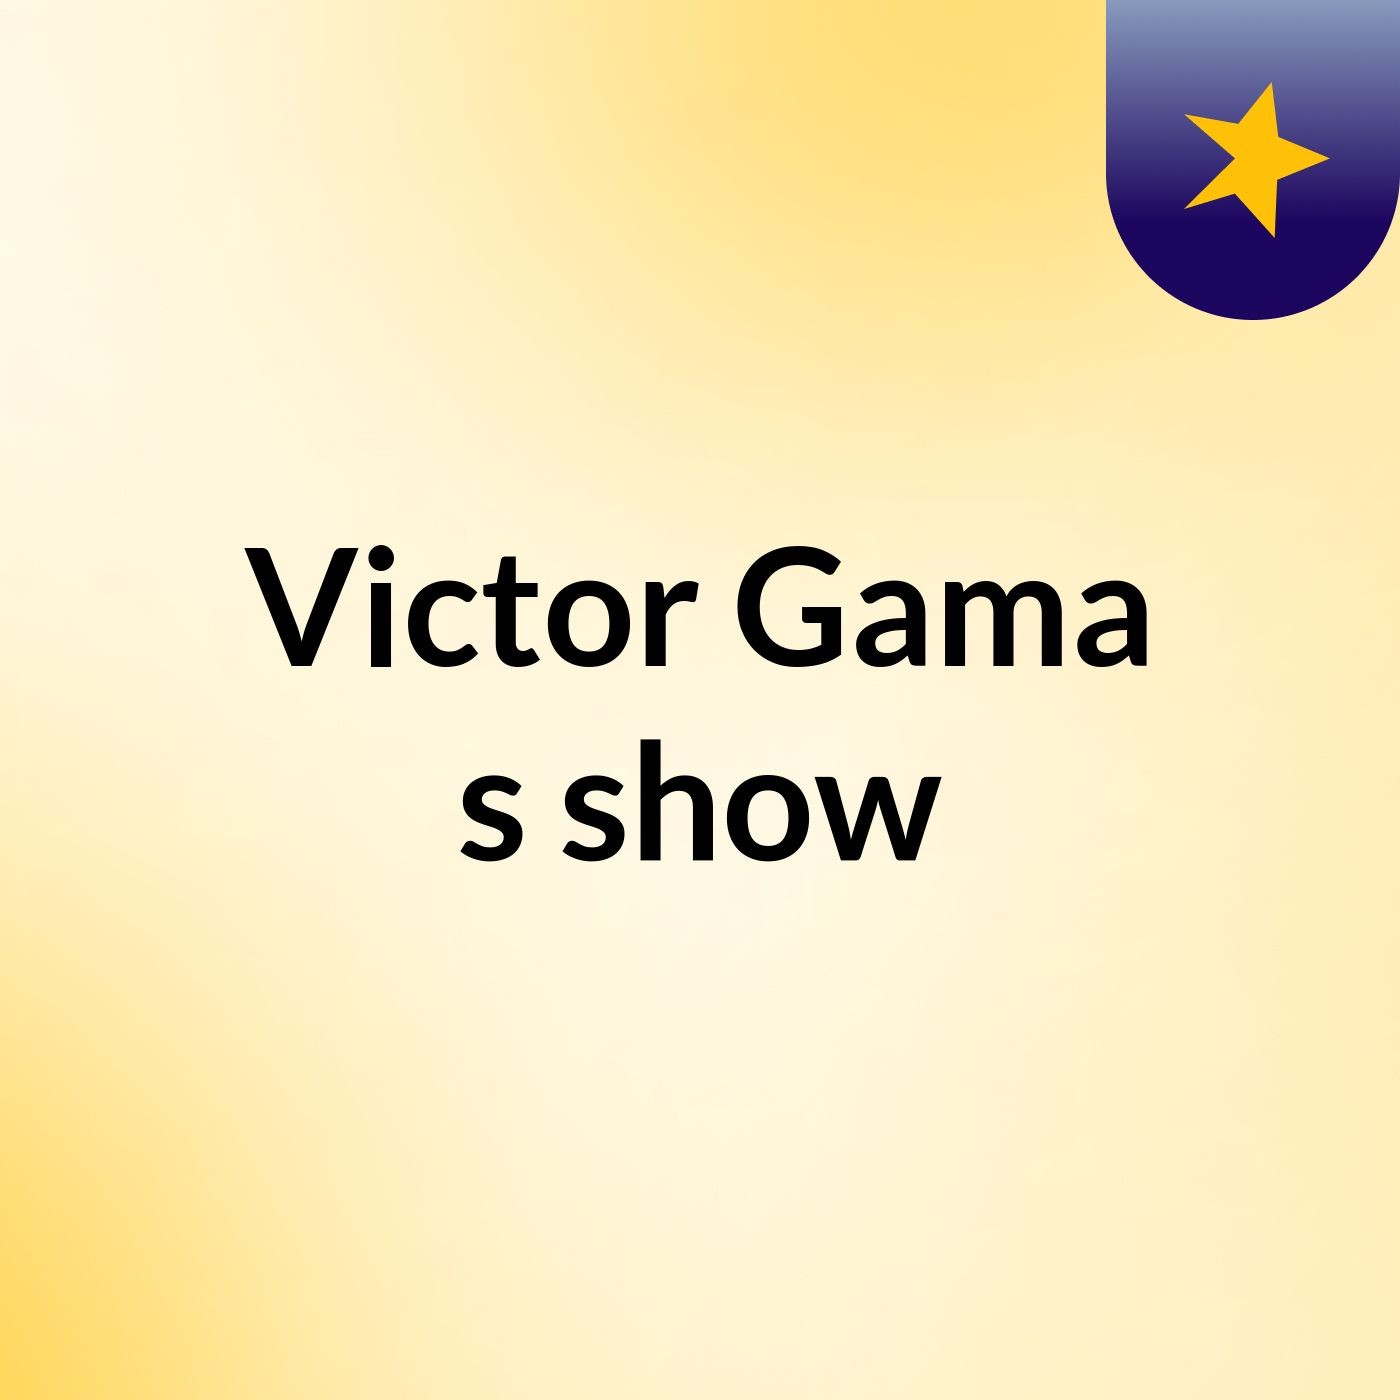 Victor Gama's show